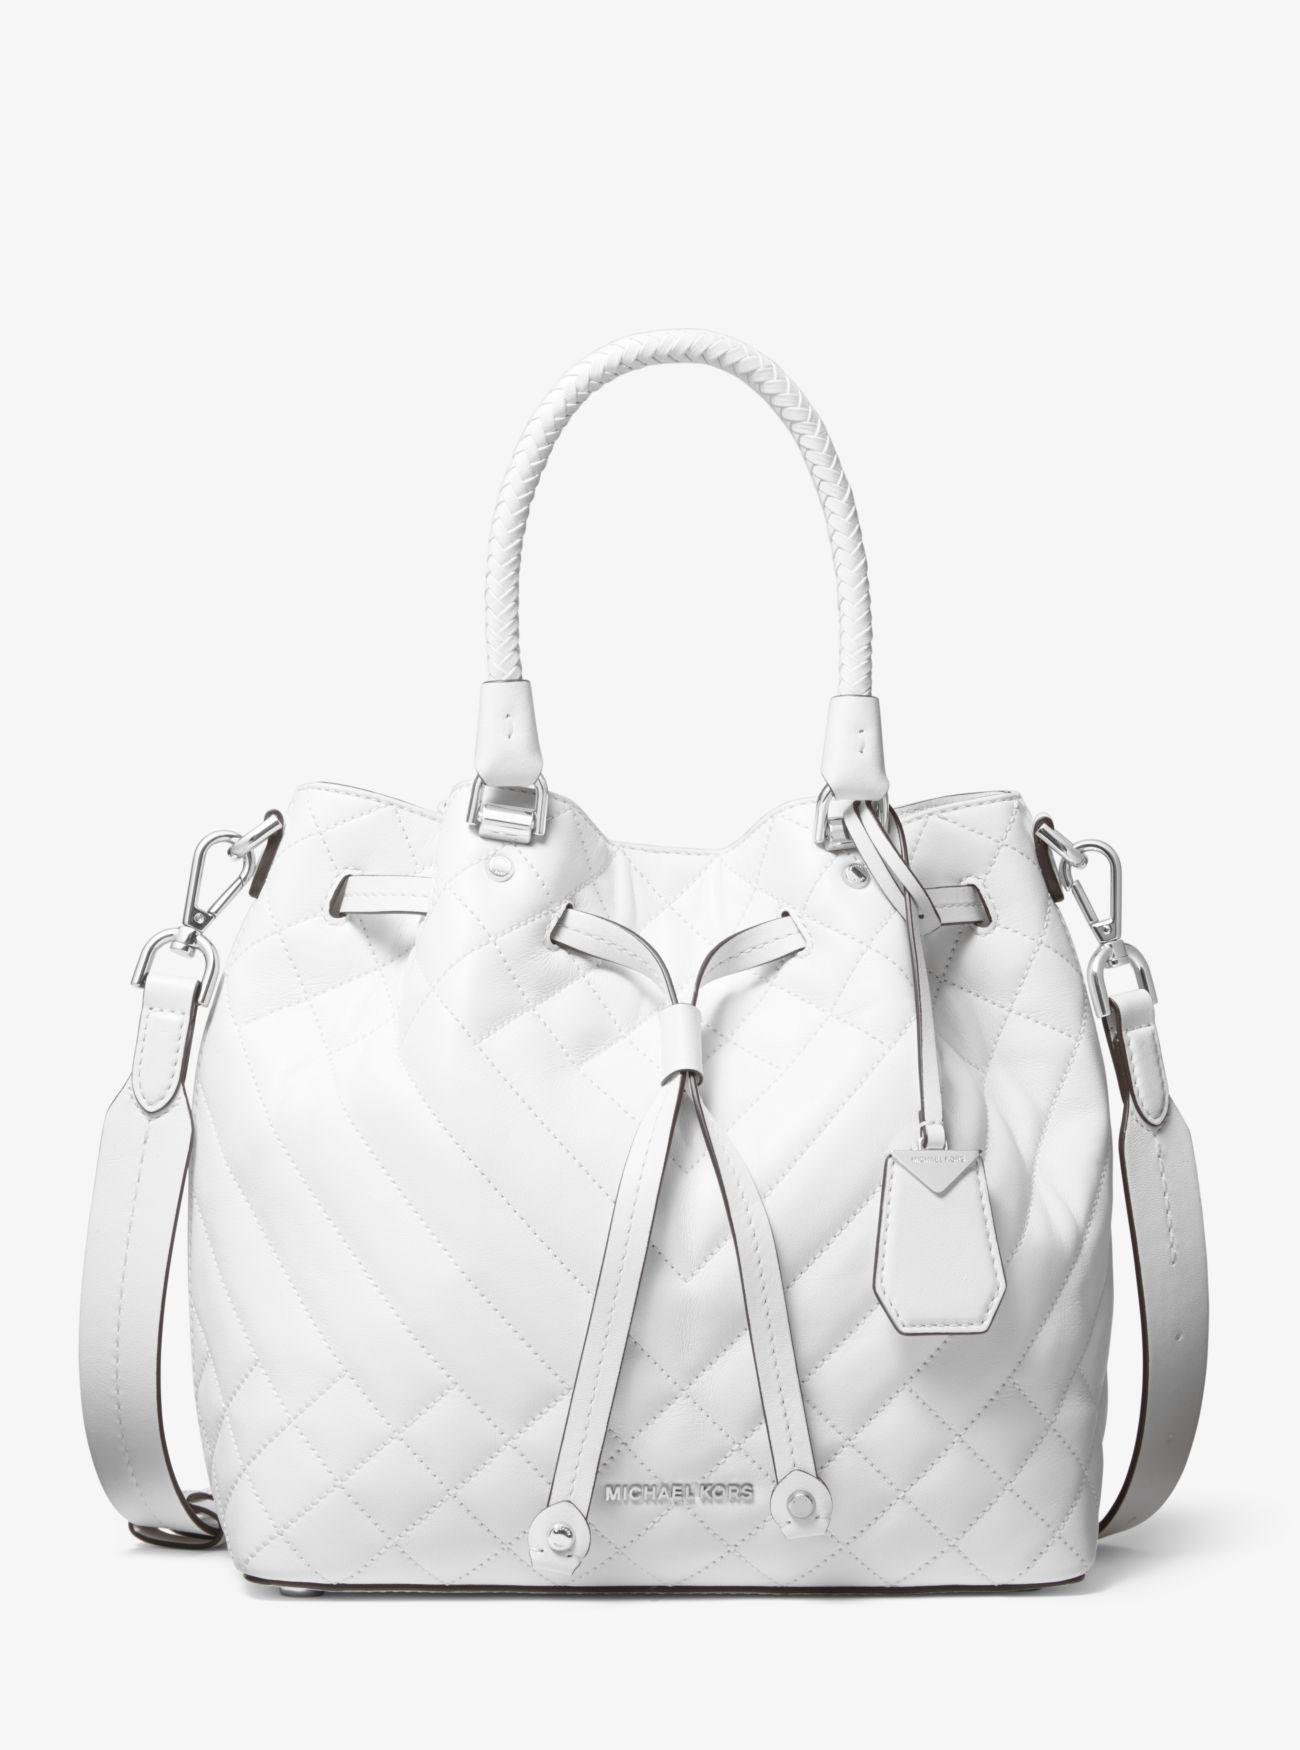 Michael Kors Blakely Medium Quilted Leather Bucket Bag in White - Lyst